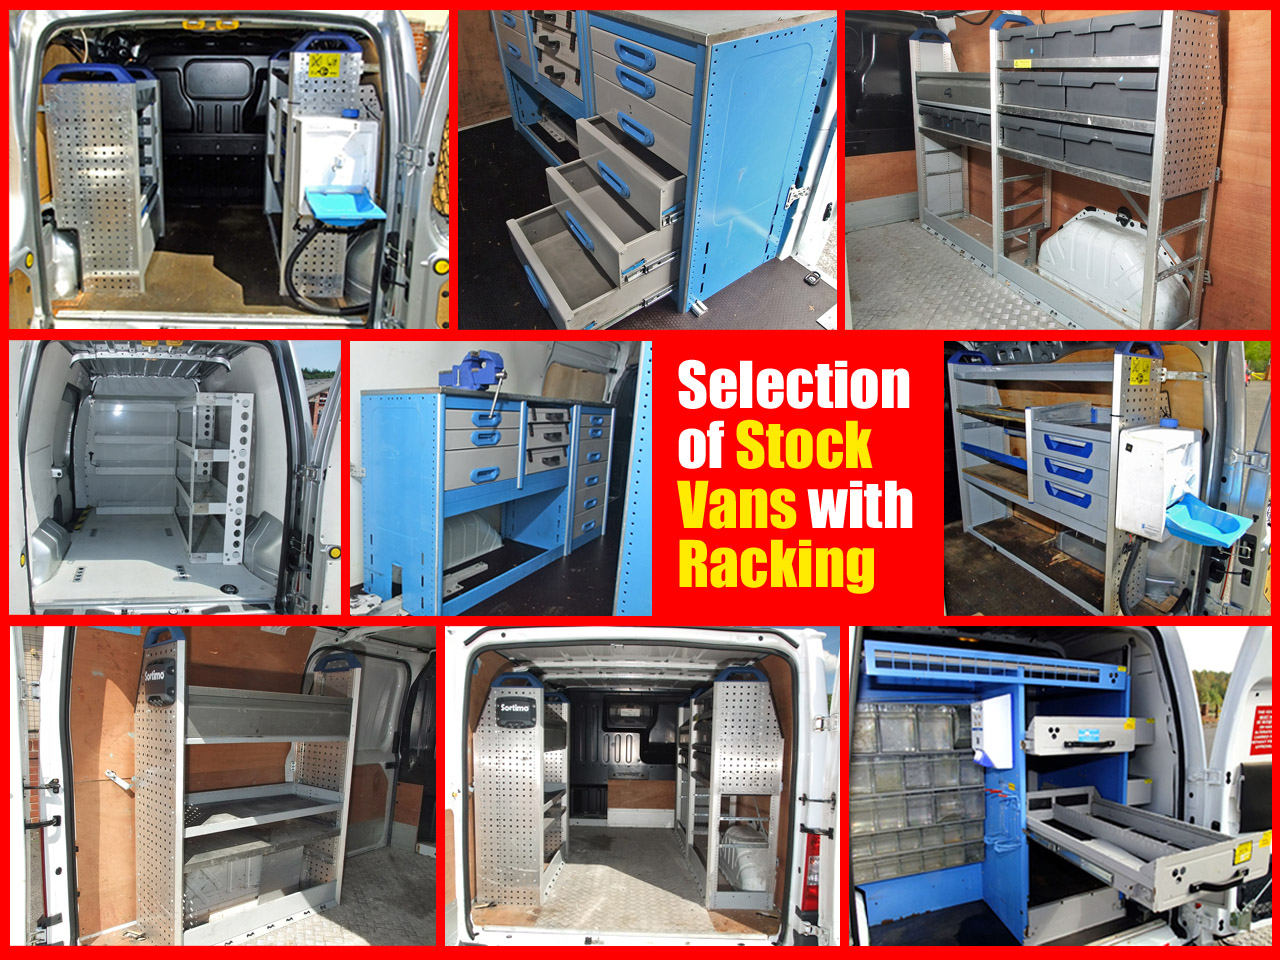 Van racking systems - shelves and storage solutions in vans